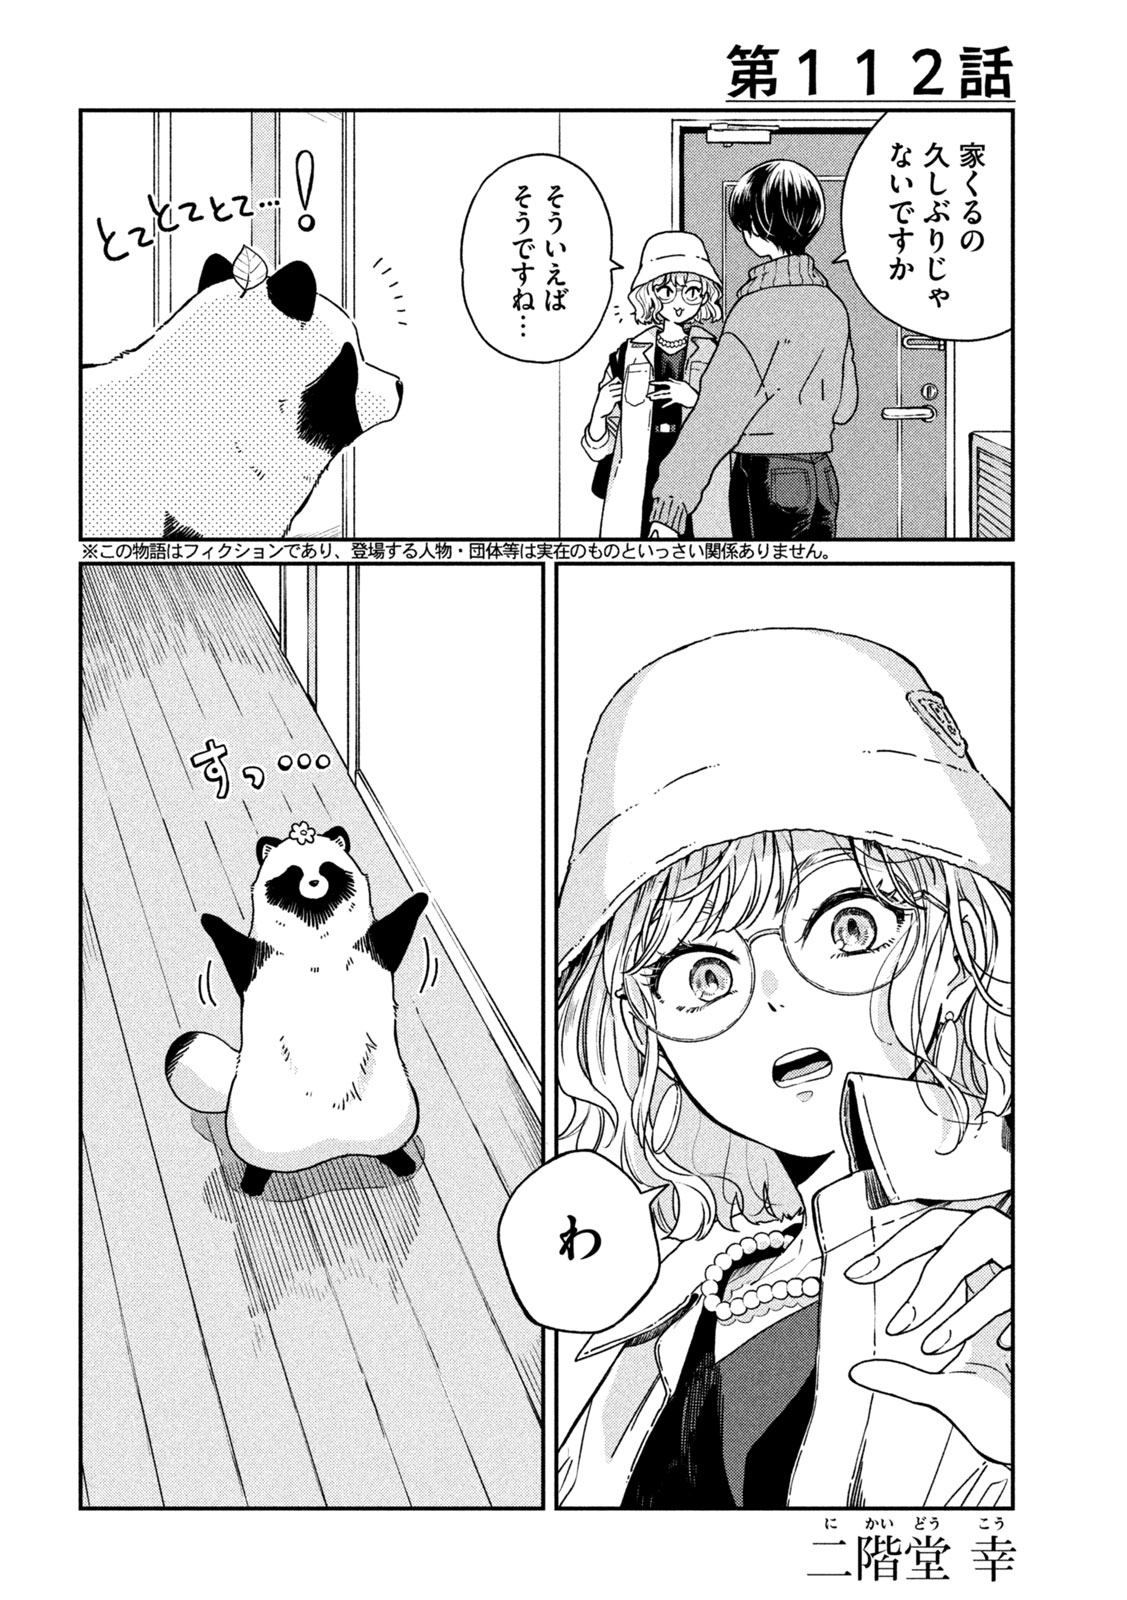 Ame to Kimi to - Chapter 112 - Page 2